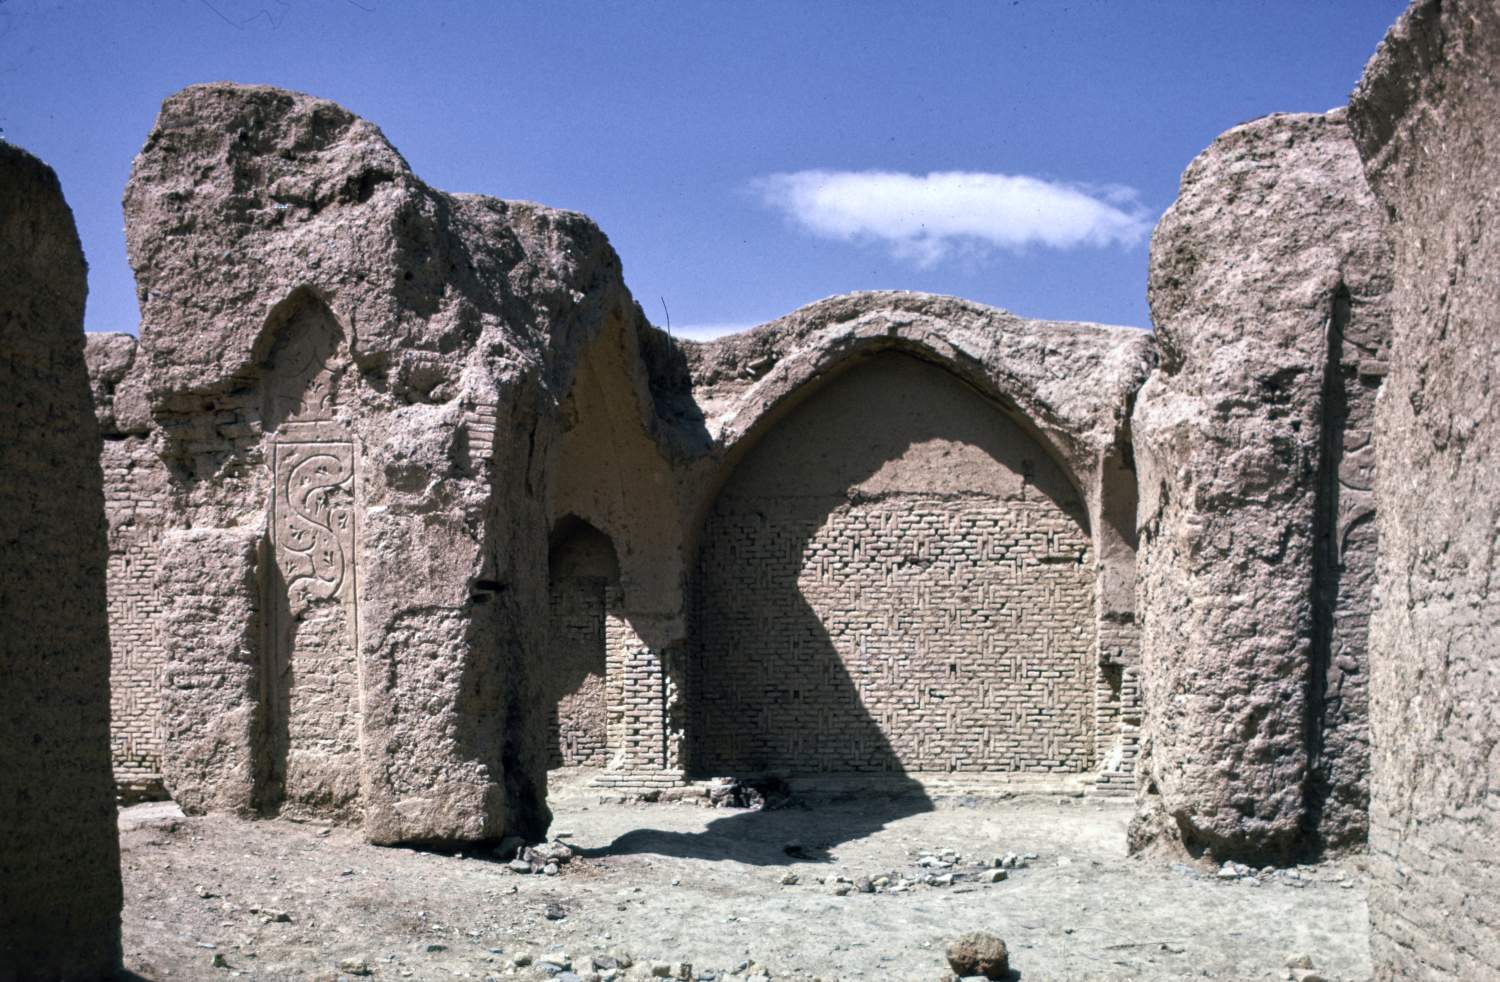 View toward southwestern enclosure wall (qibla wall) showing baked brick masonry and remnants of piers and arches in foreground.